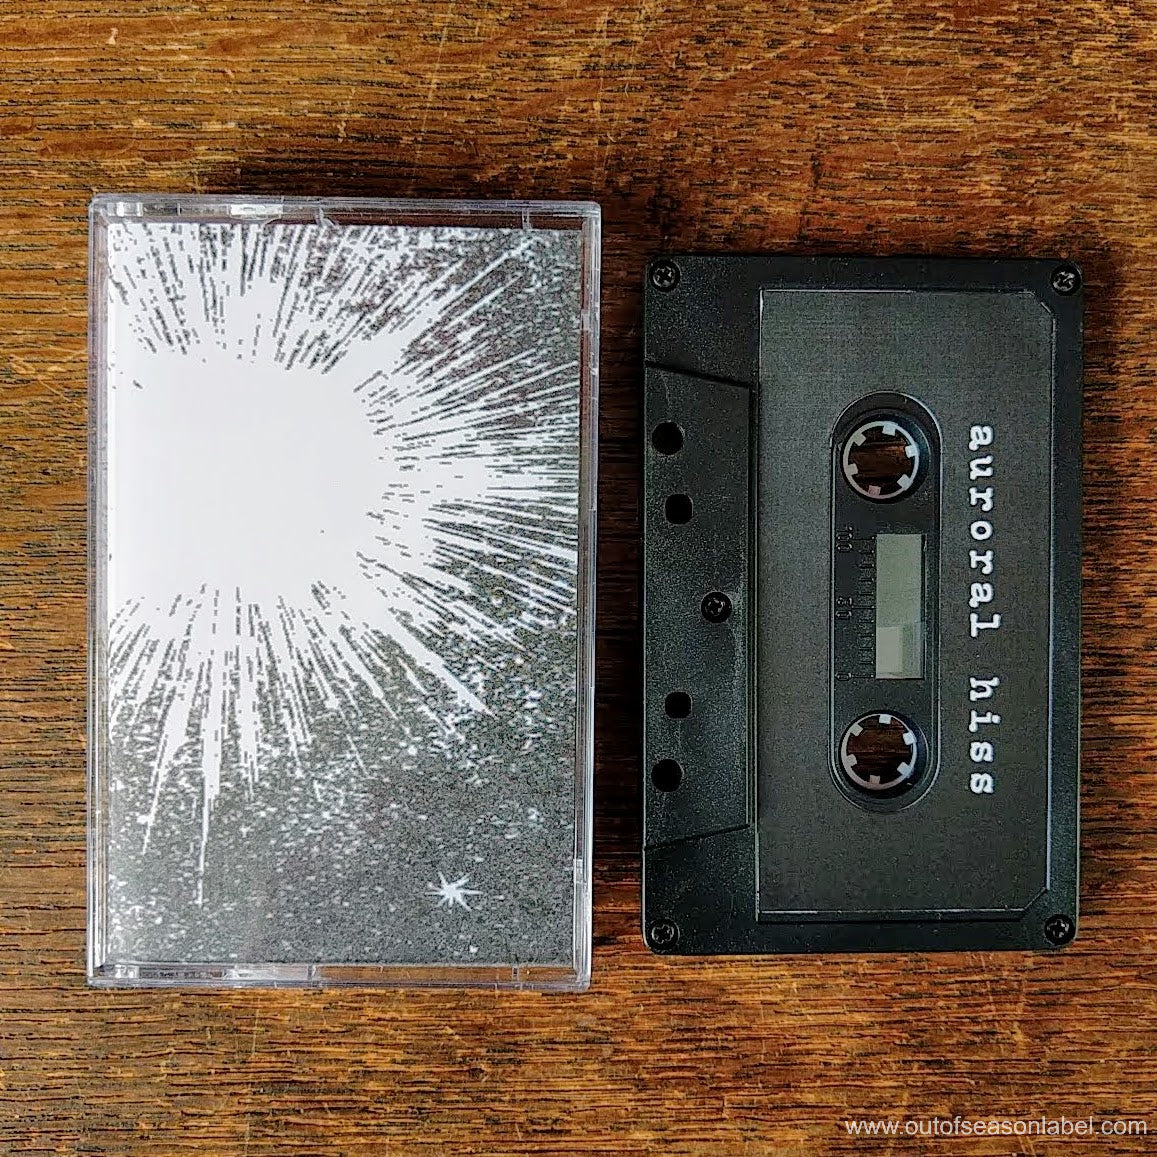 [SOLD OUT] AURORAL HISS "Auroral Hiss" Cassette Tape